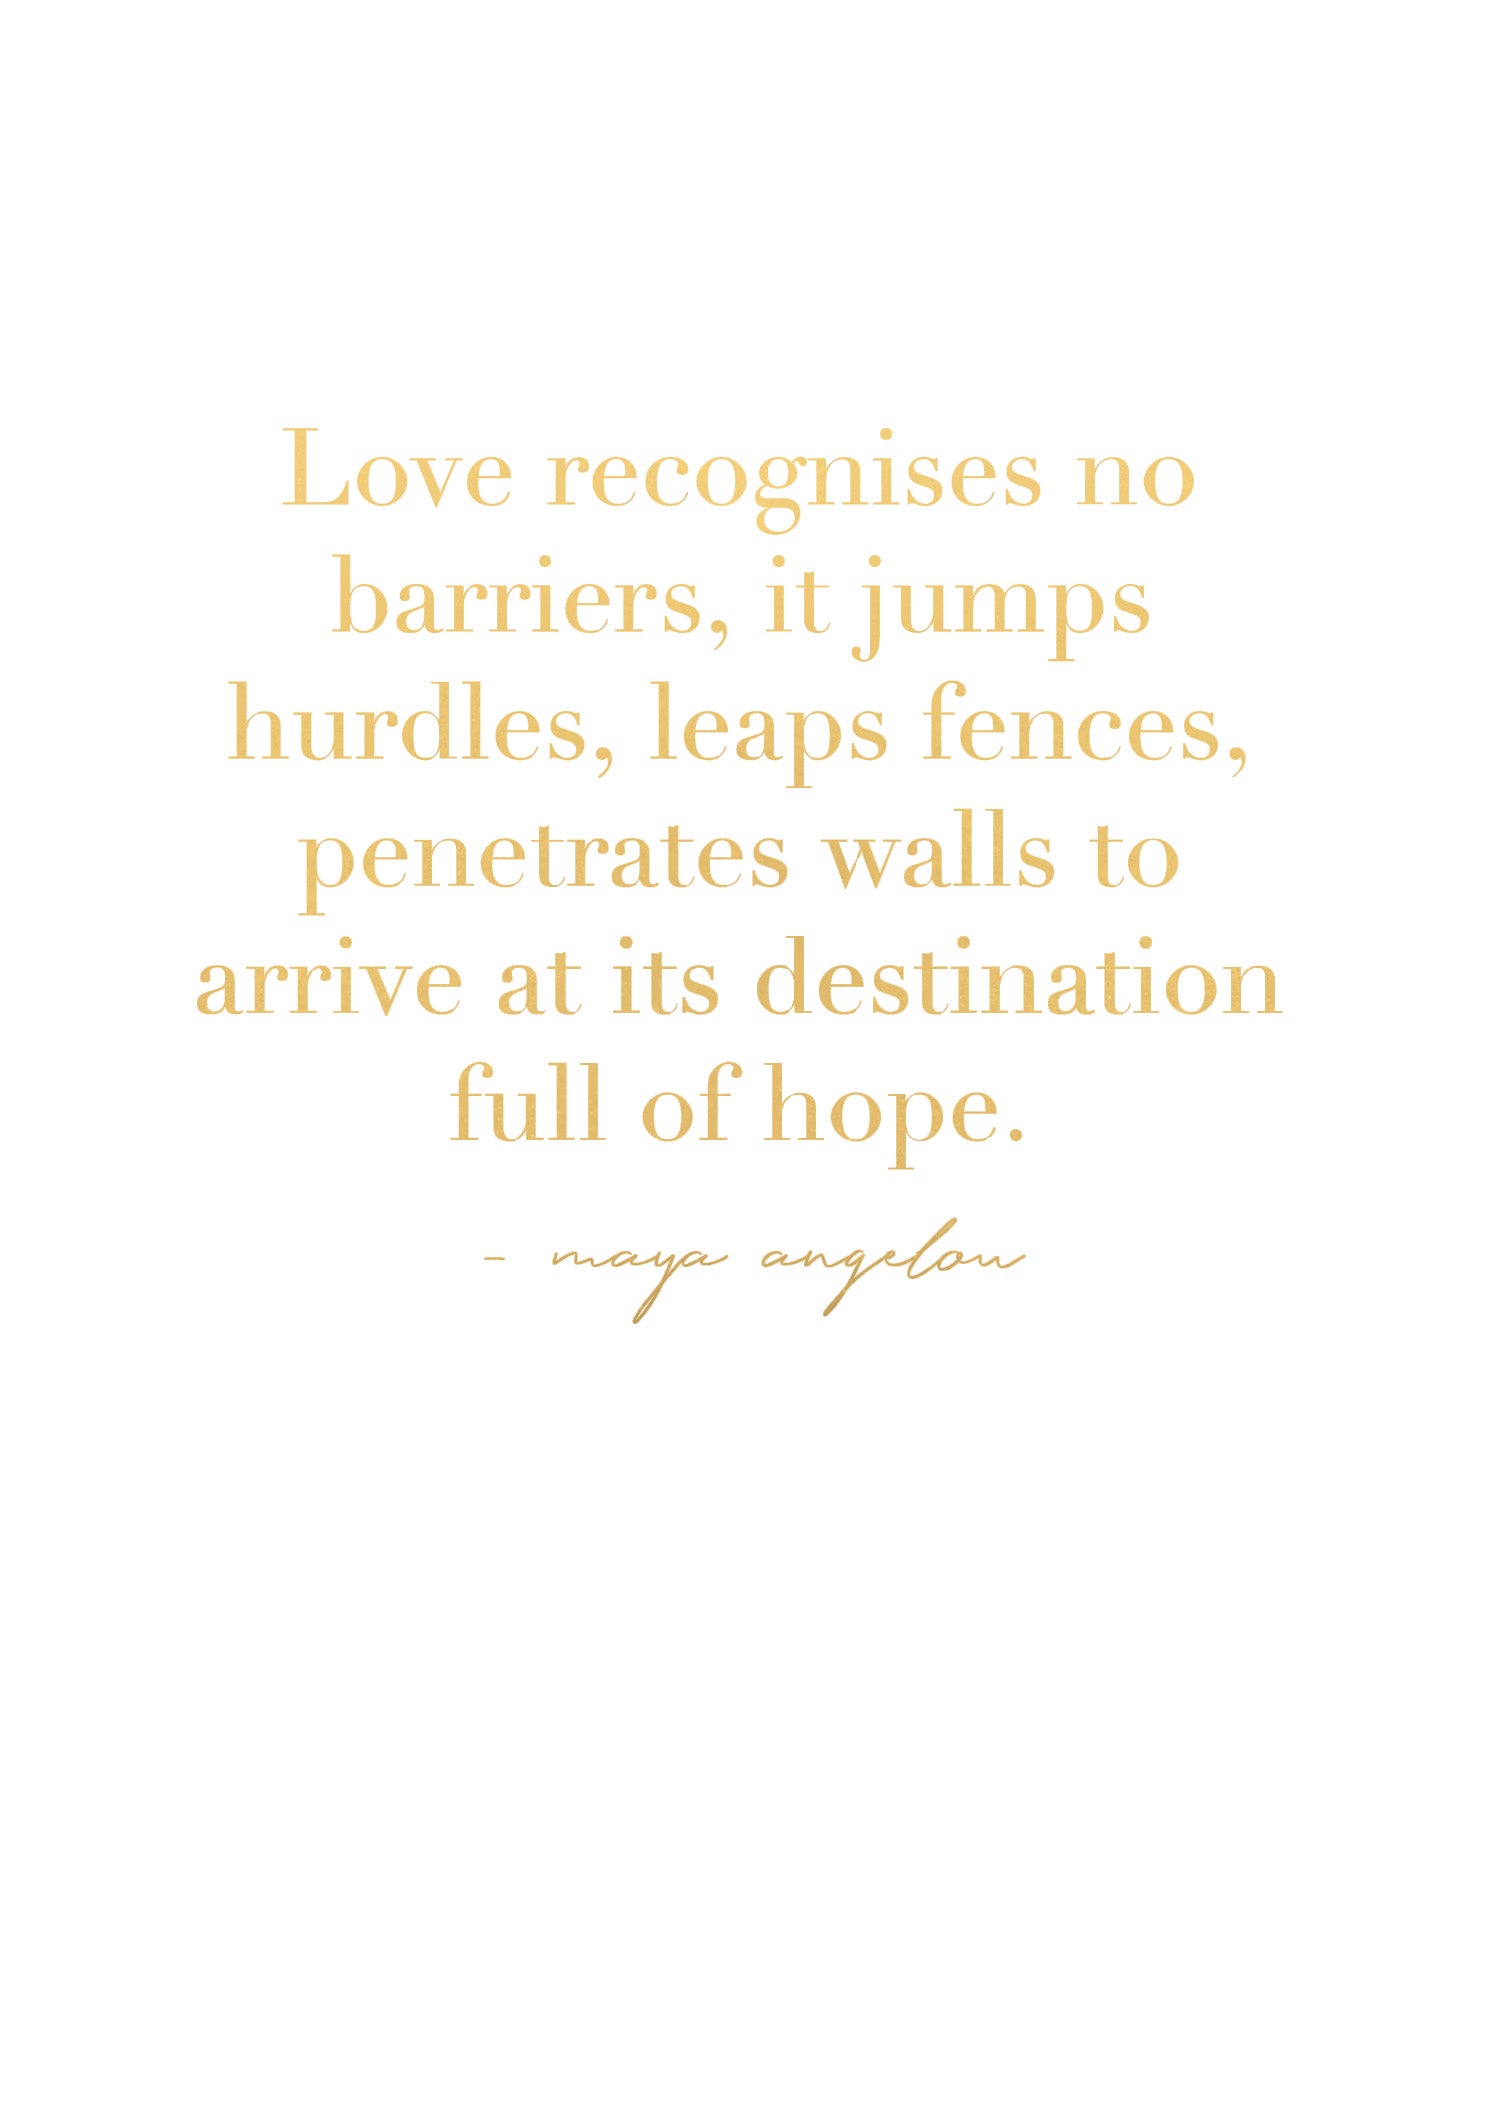 Greeting Card WEDDING - LOVE QUOTE